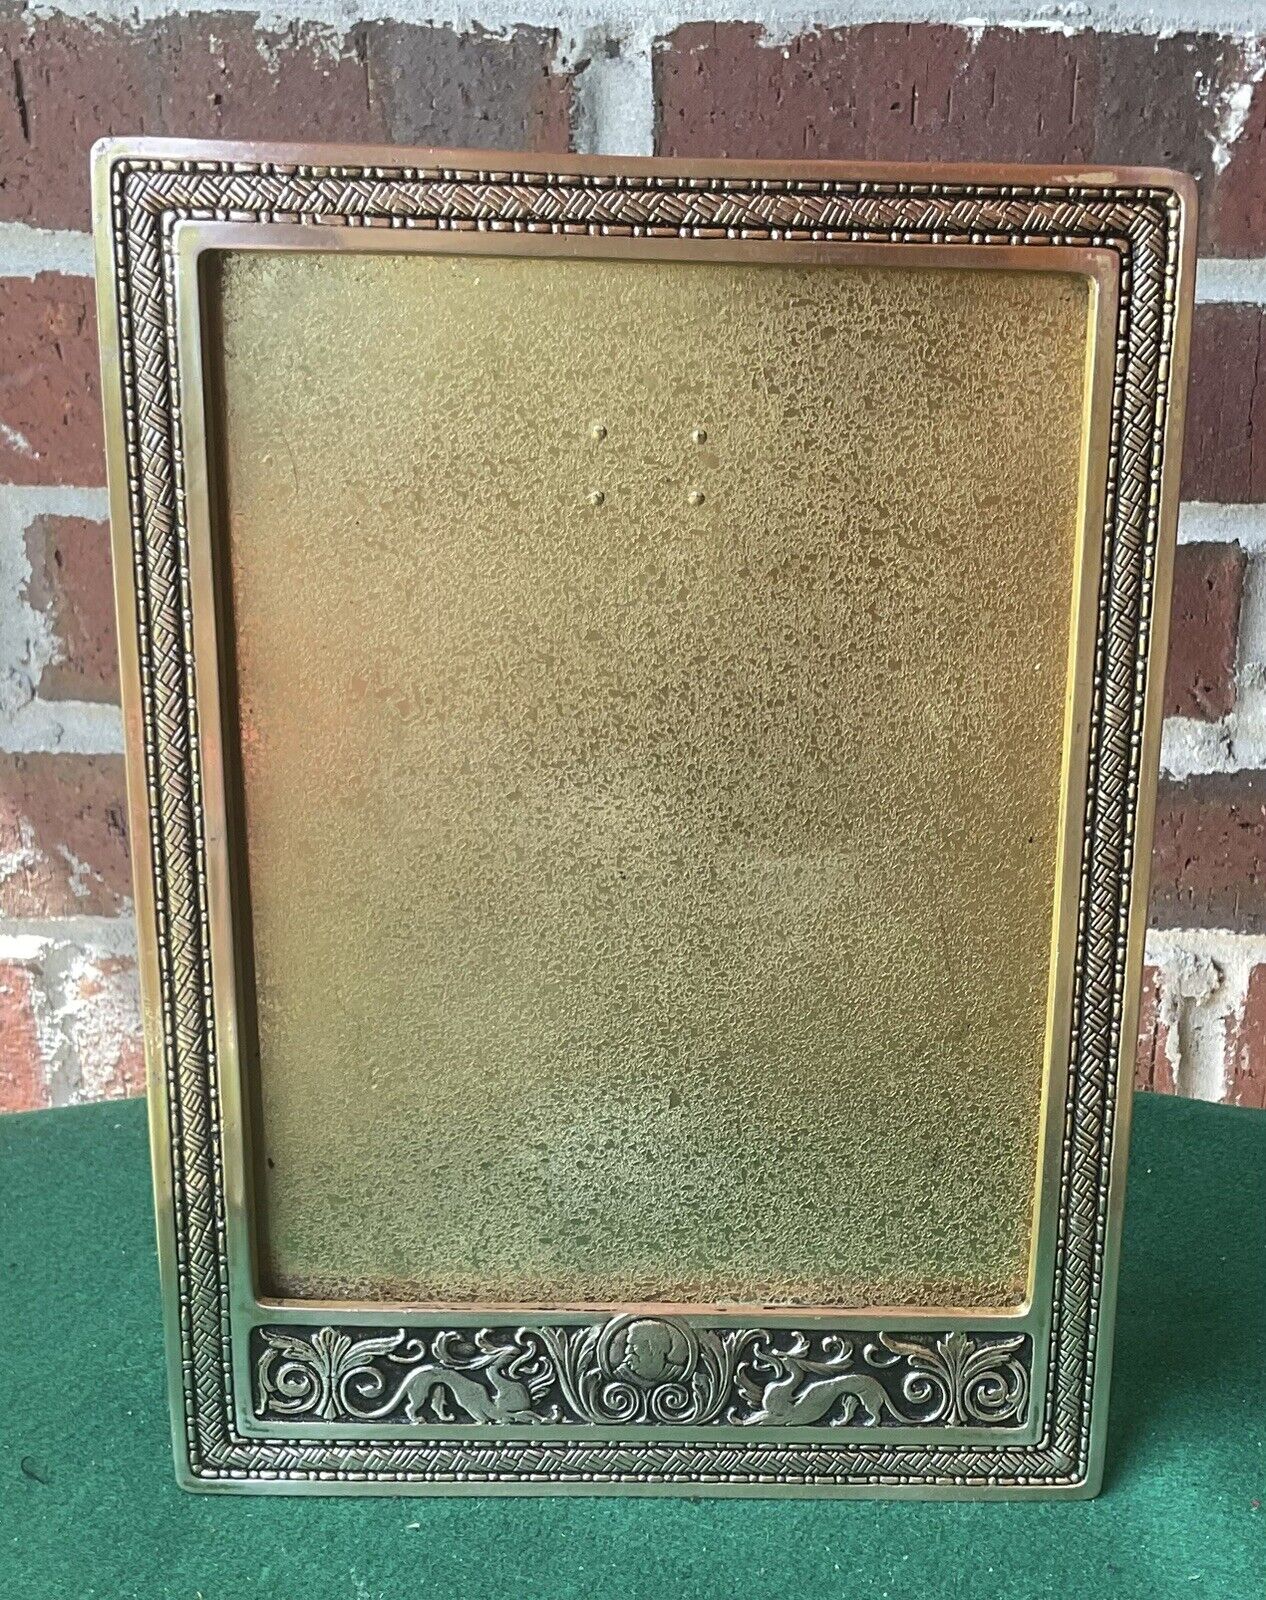 Tiffany Studios Spanish picture frame, 11 3/4” tall, c1915, #1892, very rare